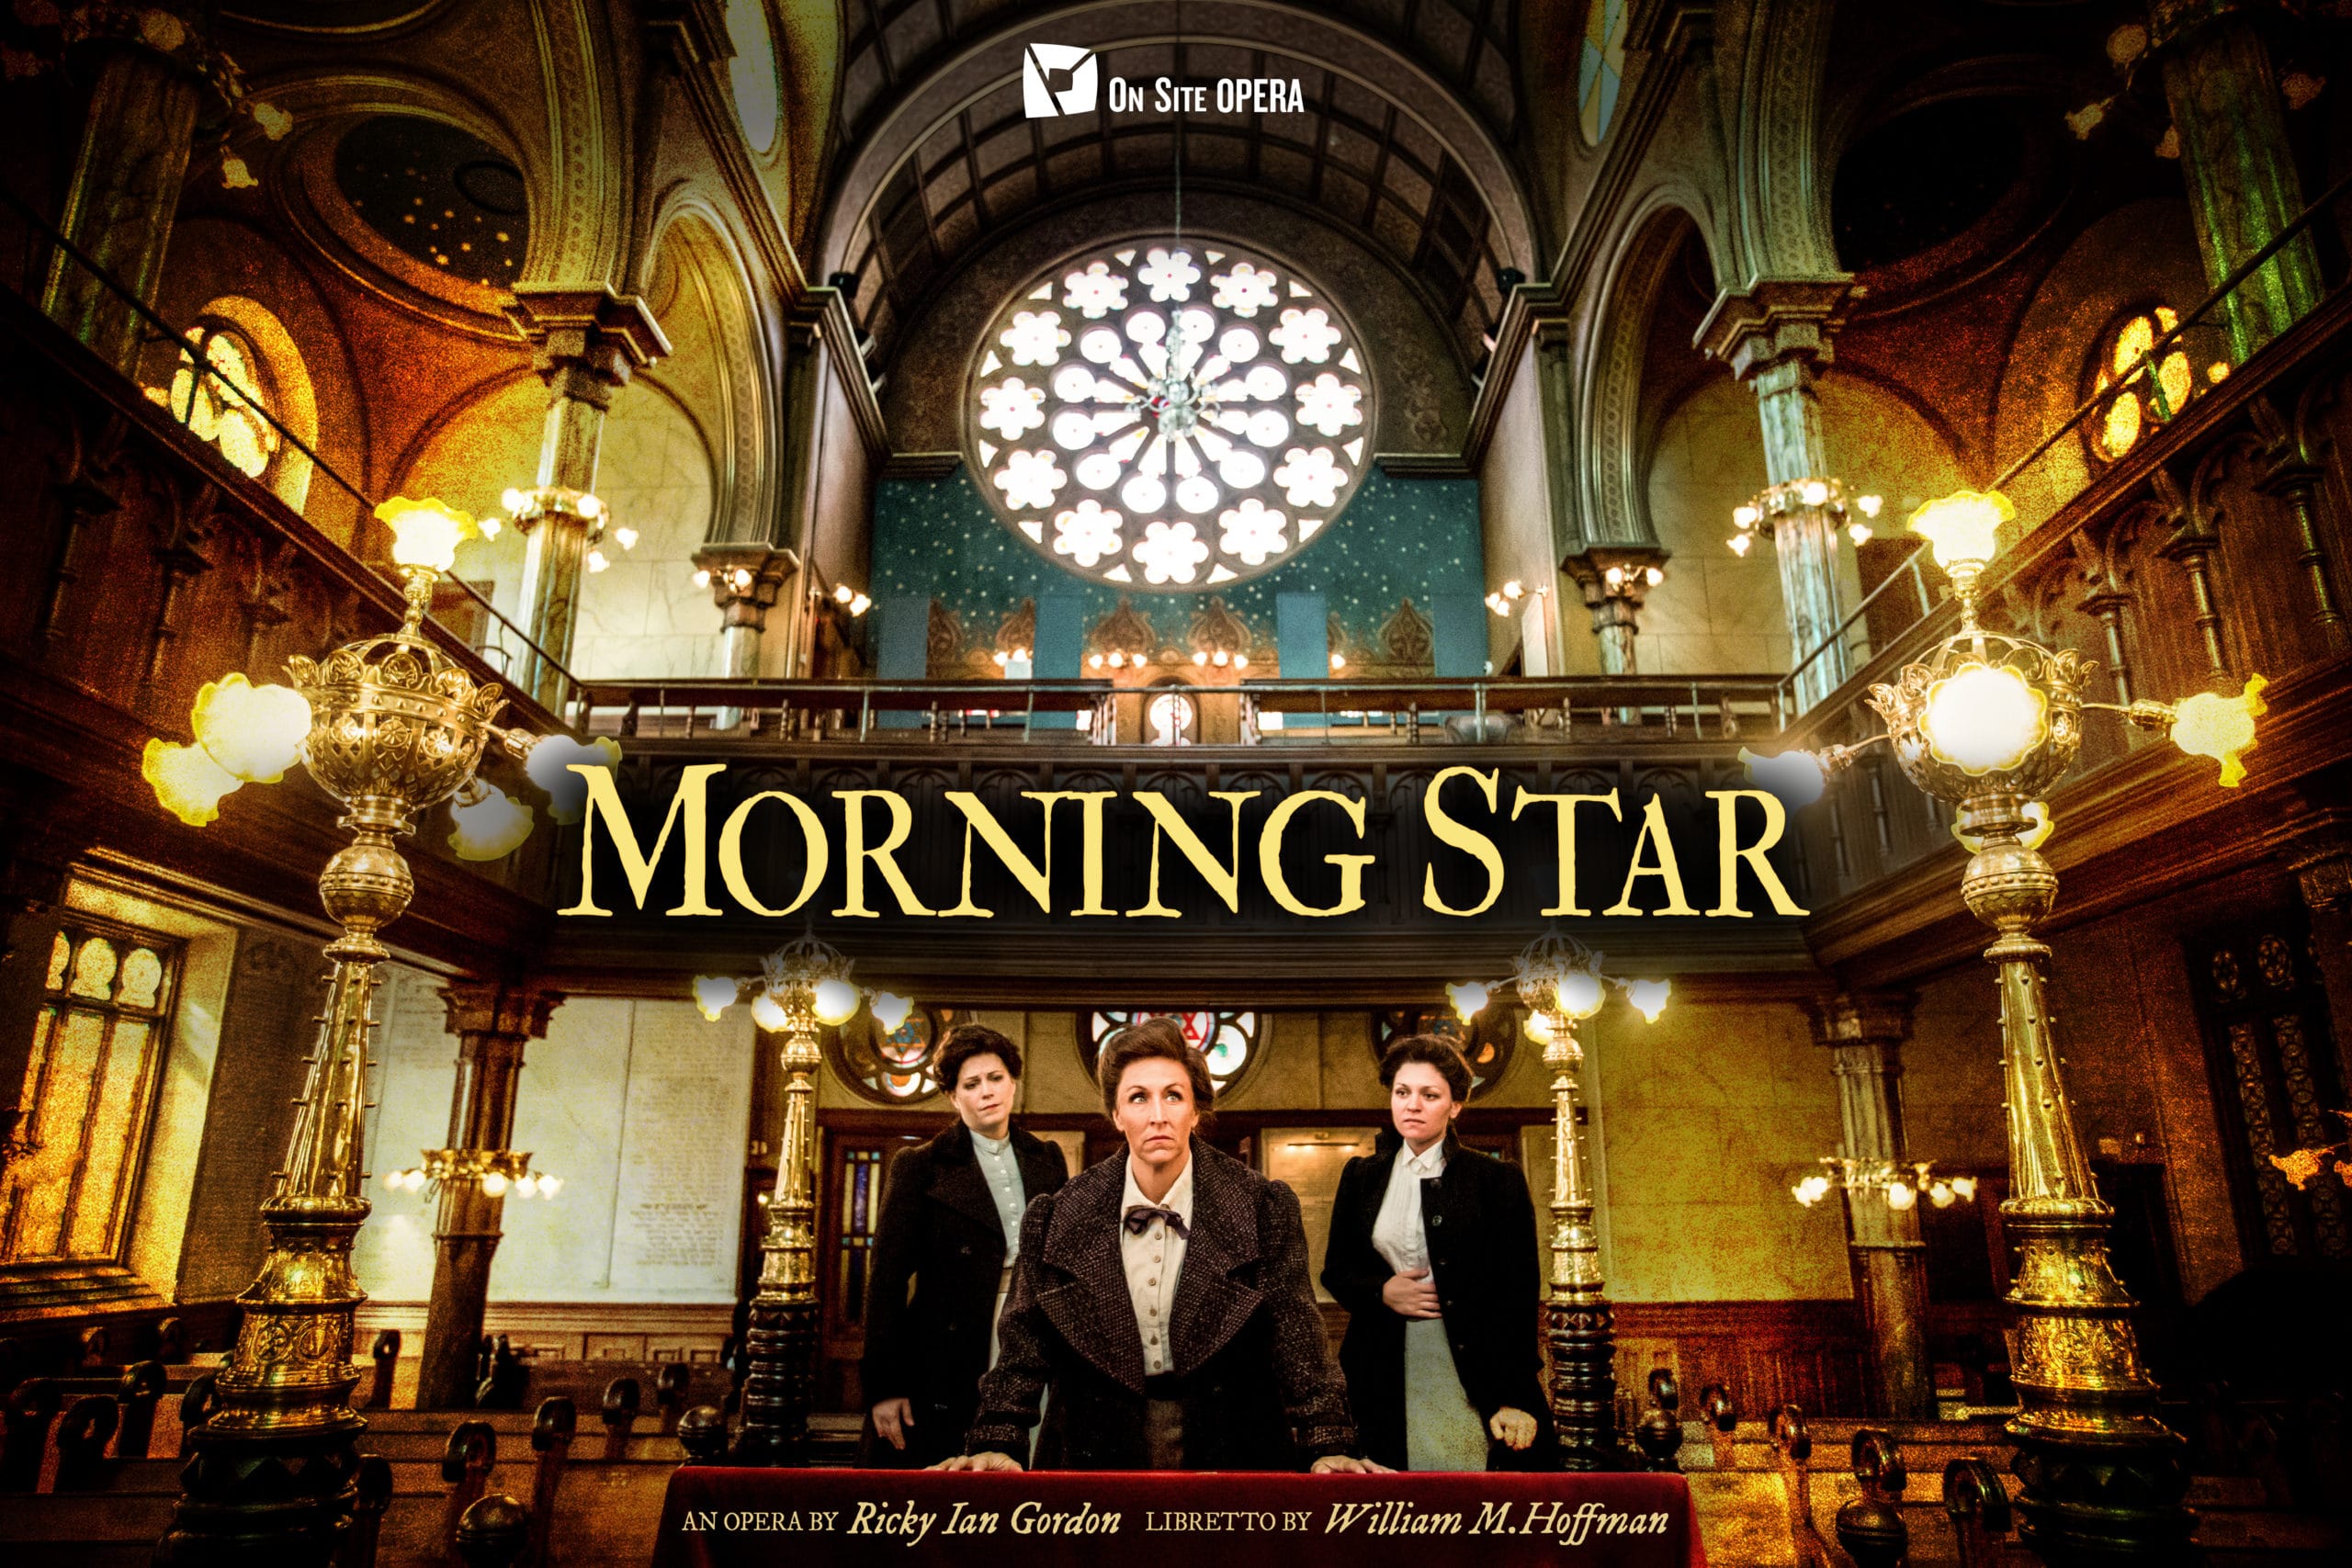 Morning Star poster showing three women in a church dressed in costume